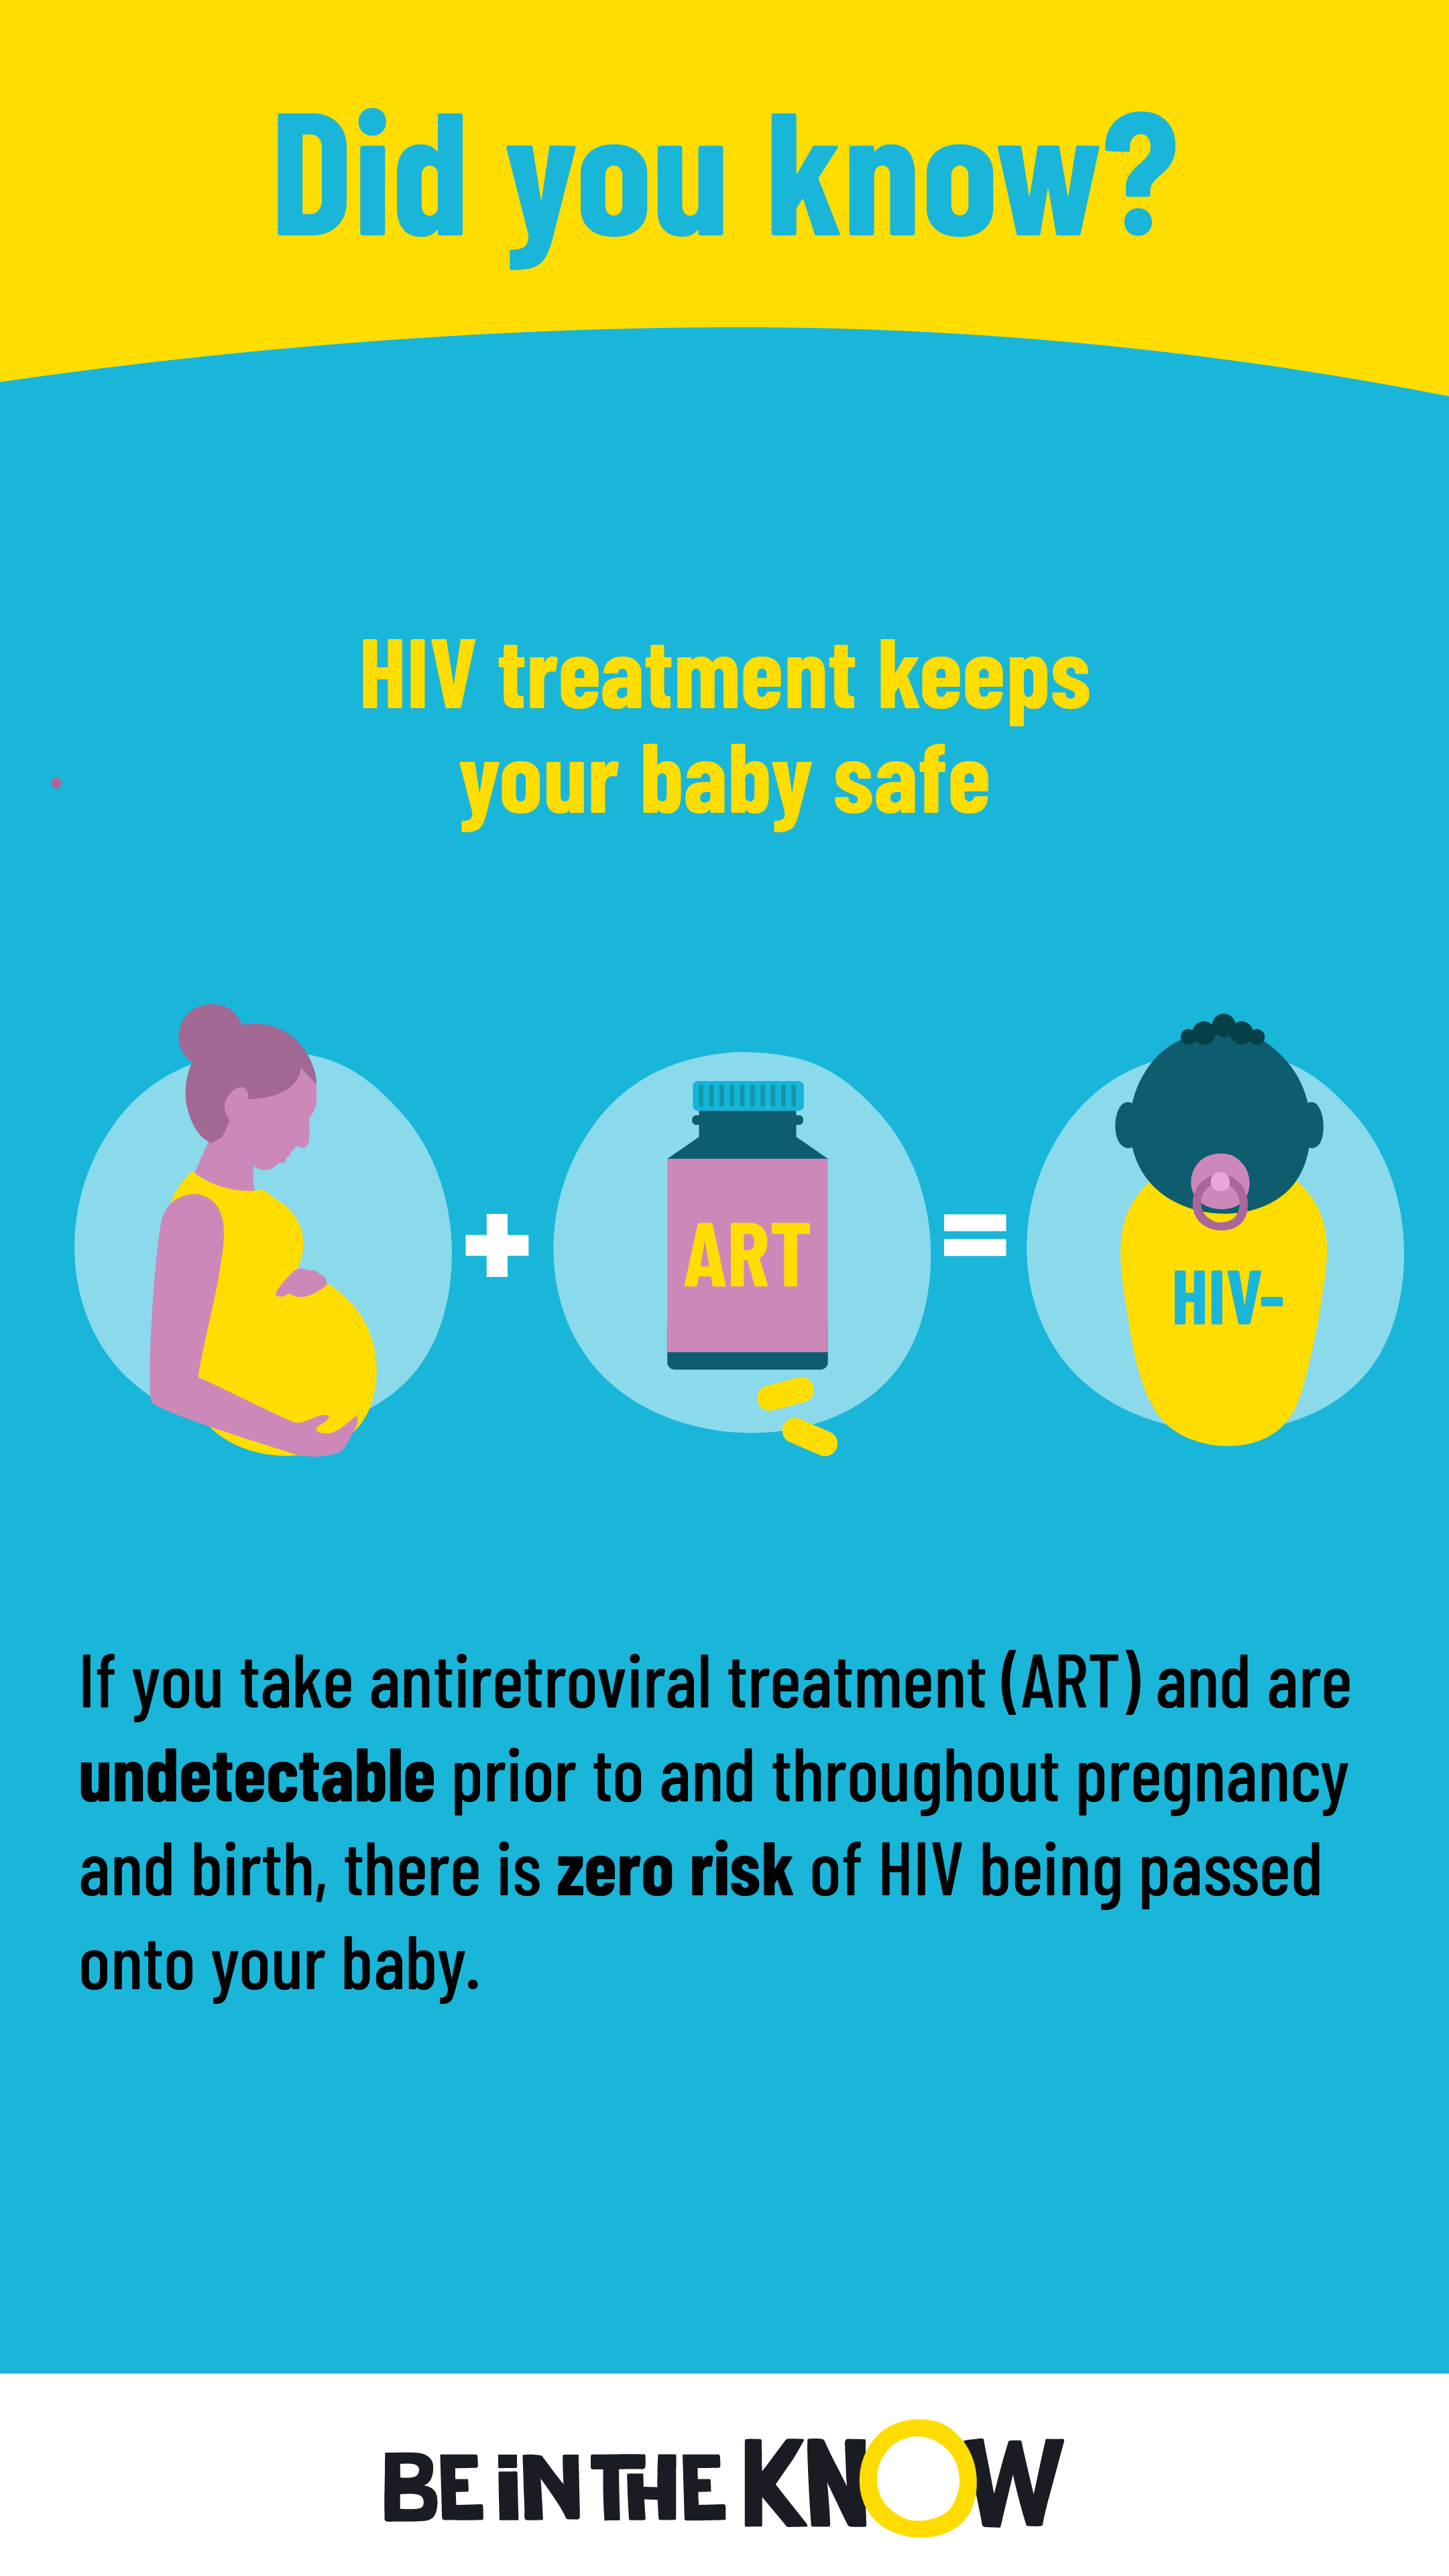 HIV treatment keeps your baby safe